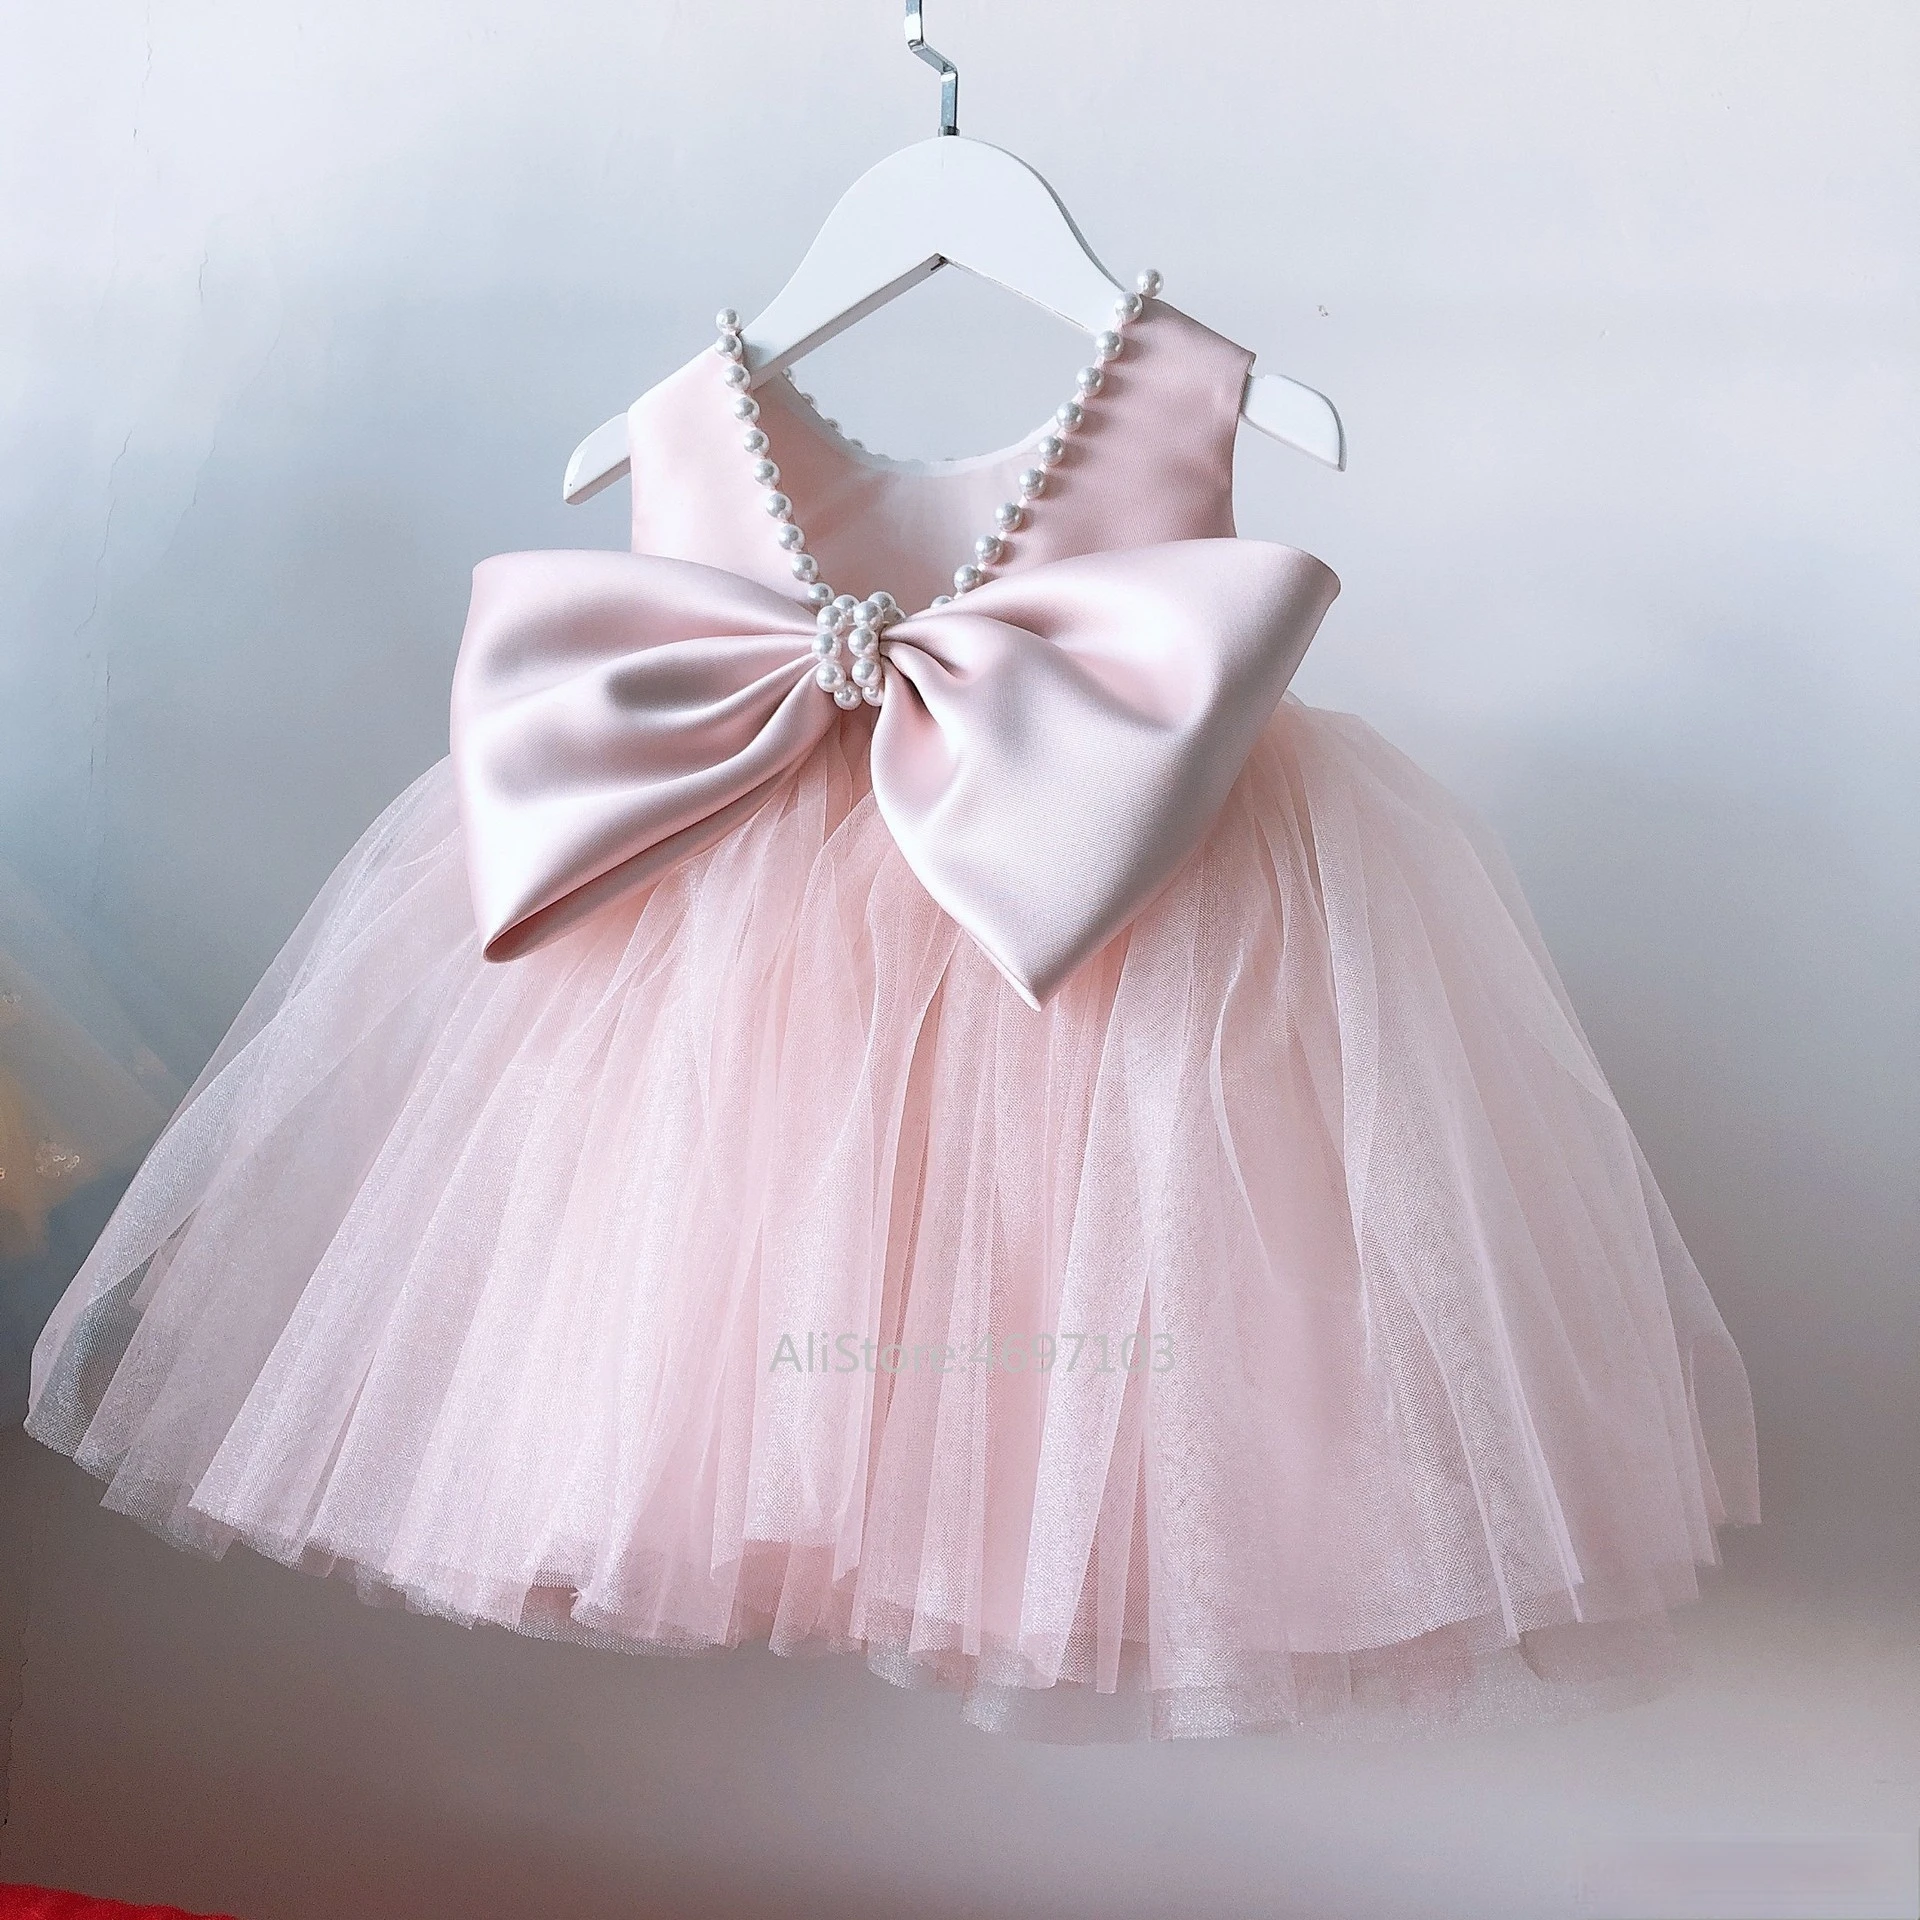 

Tailor-made Cheaper Real Knee Length Beading Ball Gown Flower Girl Dress for Weddings Bow-knot First Communion Dress Size 2-14Y